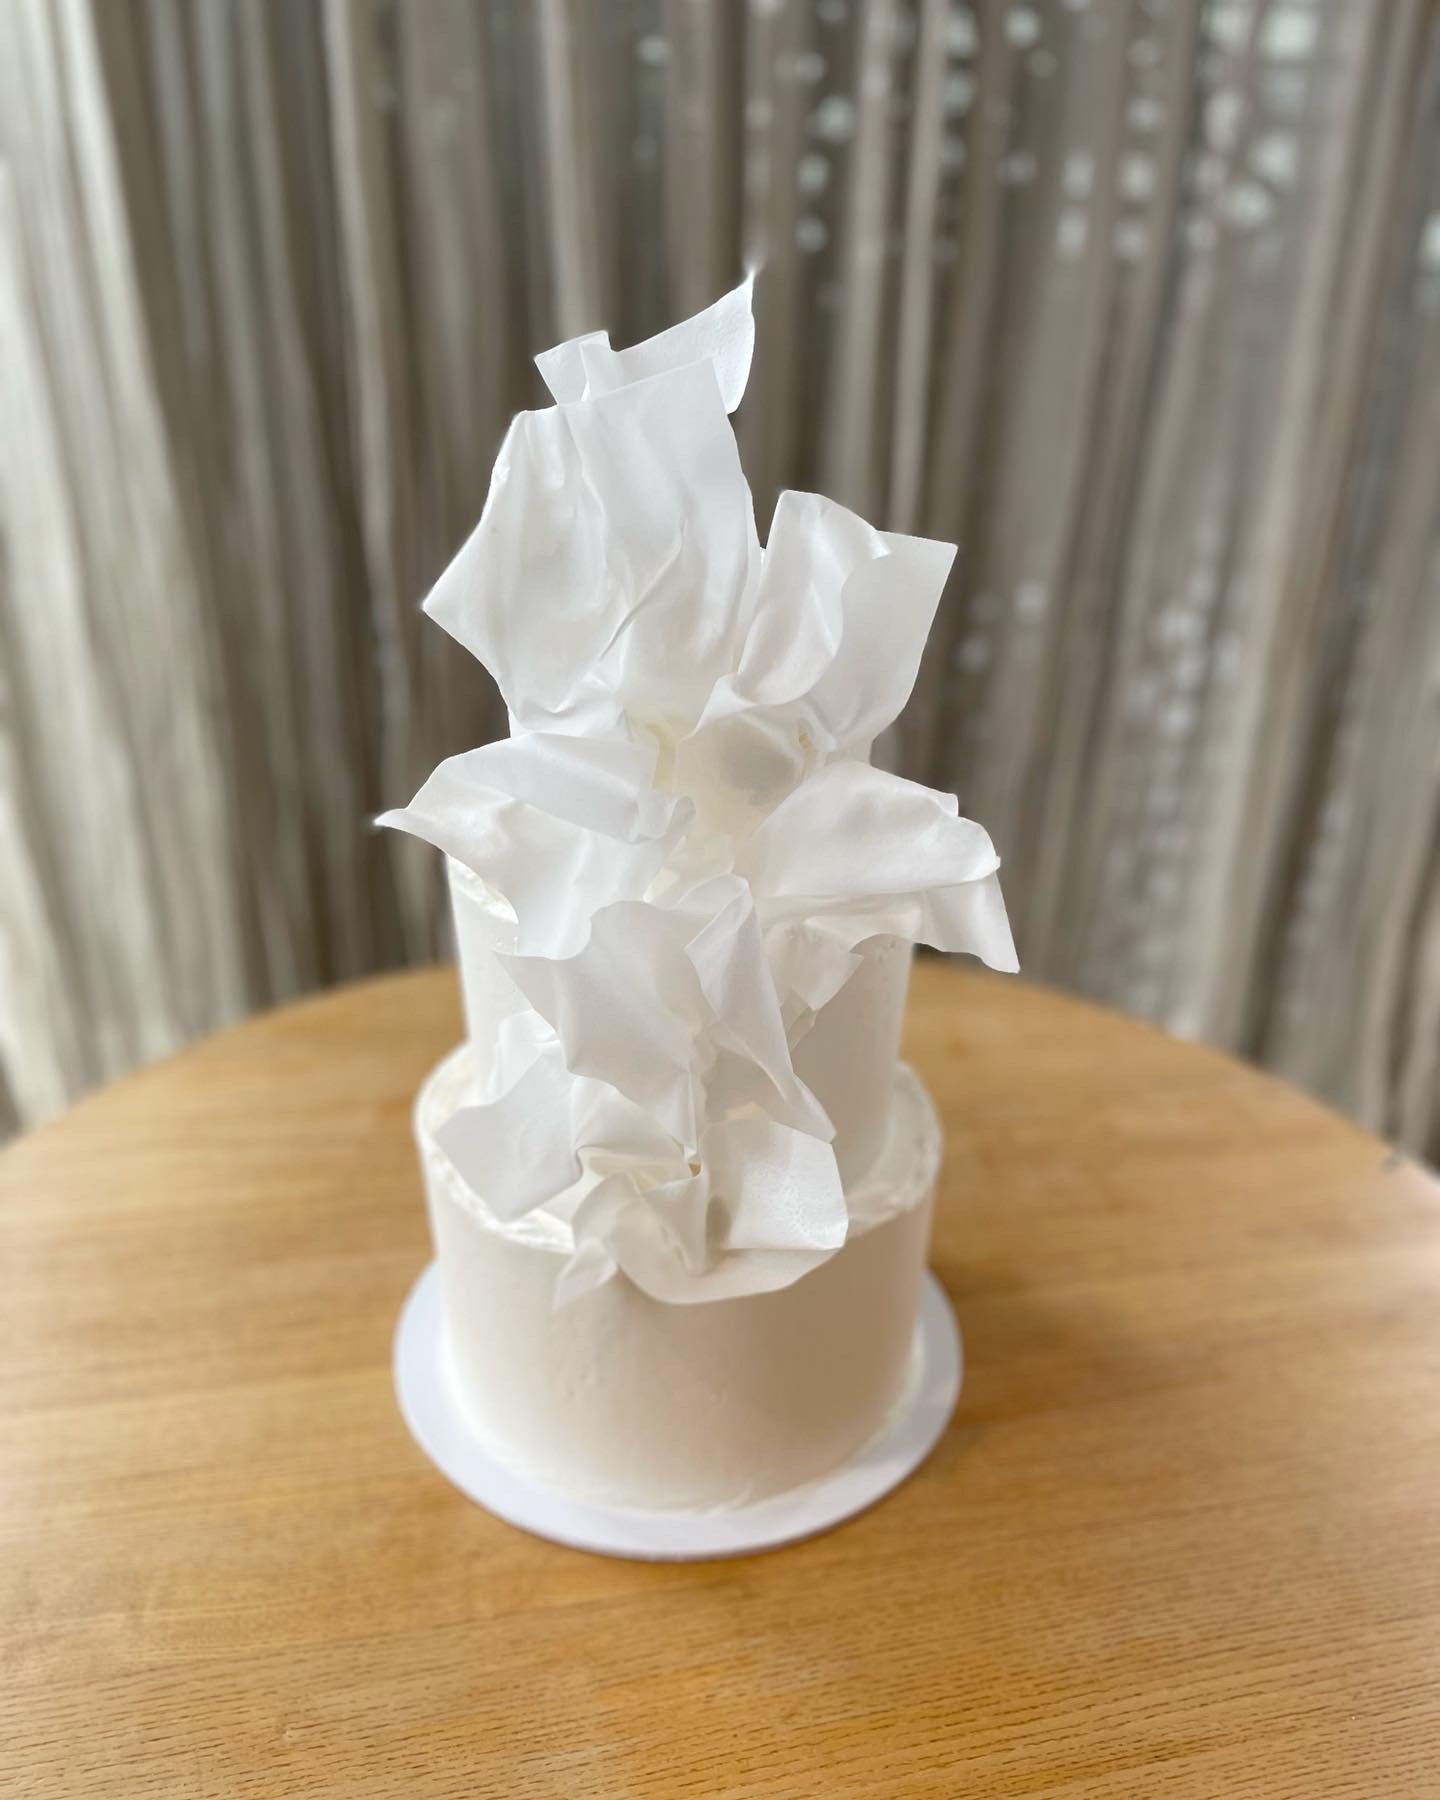 3 Tier Buttercream Cake with White Wafer Paper Sails